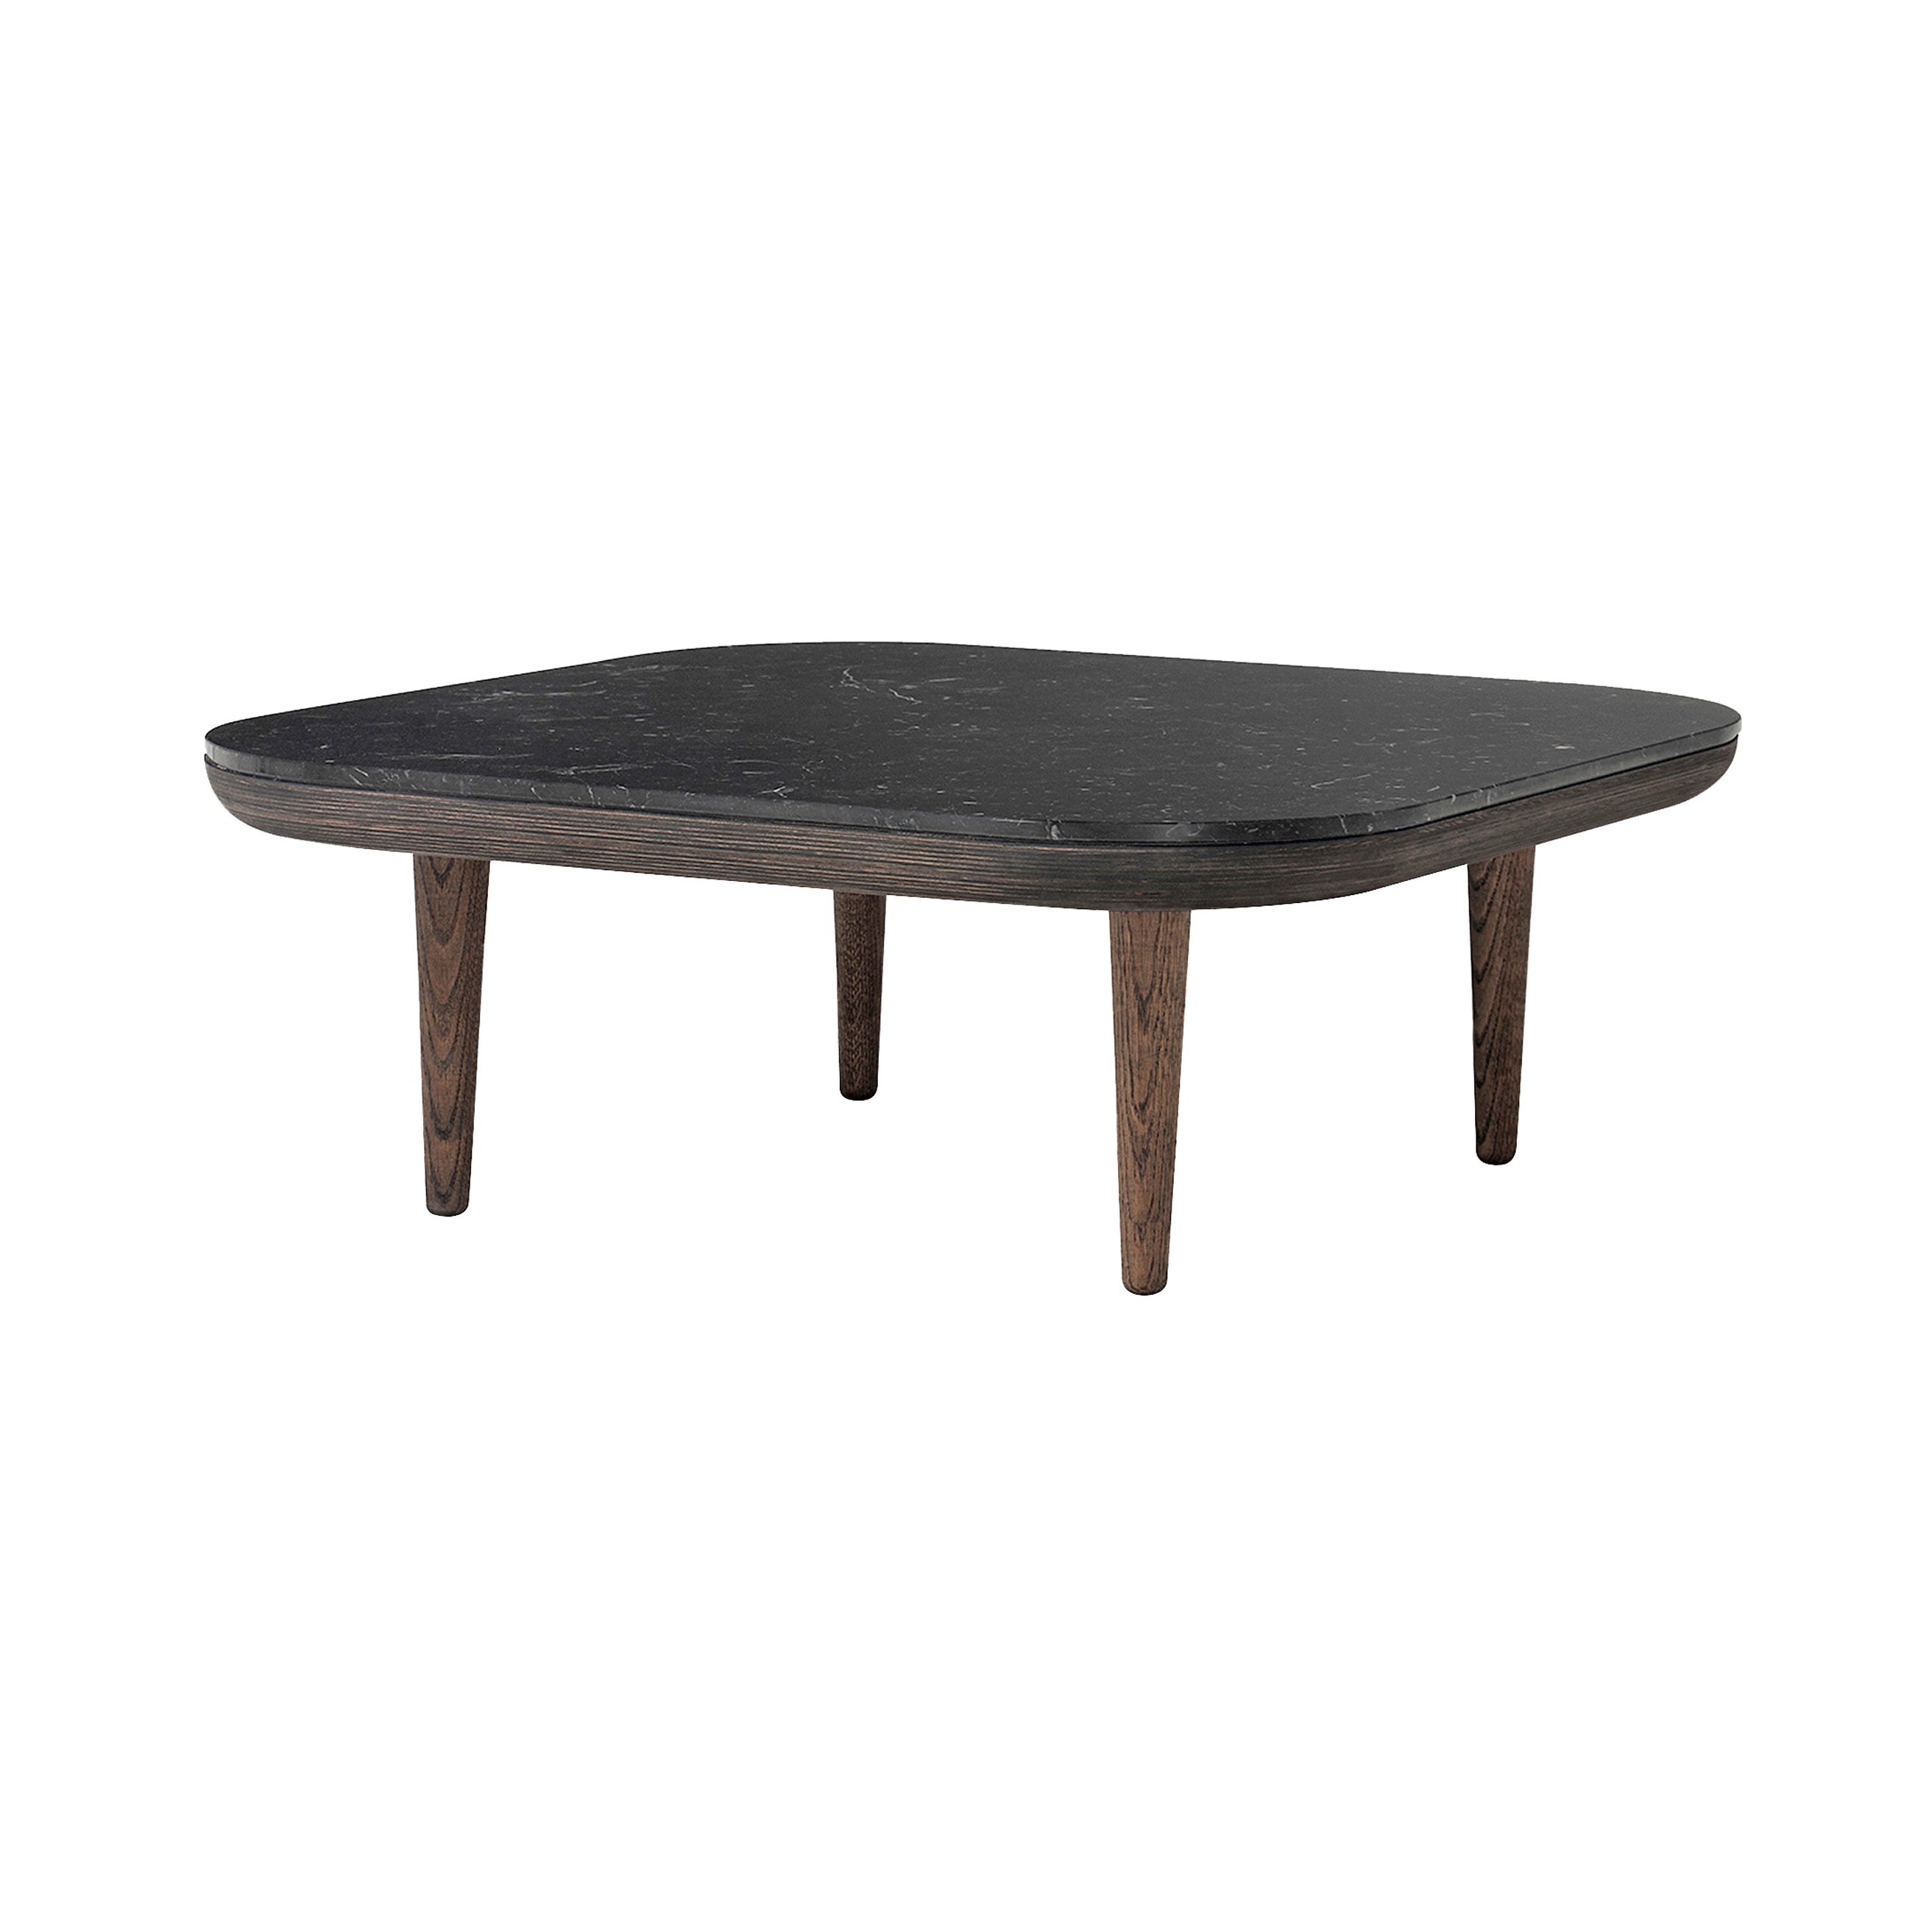 Fly Series SC4 Coffee or Side Table: Nero Marquina Marble + Smoked Oiled Oak